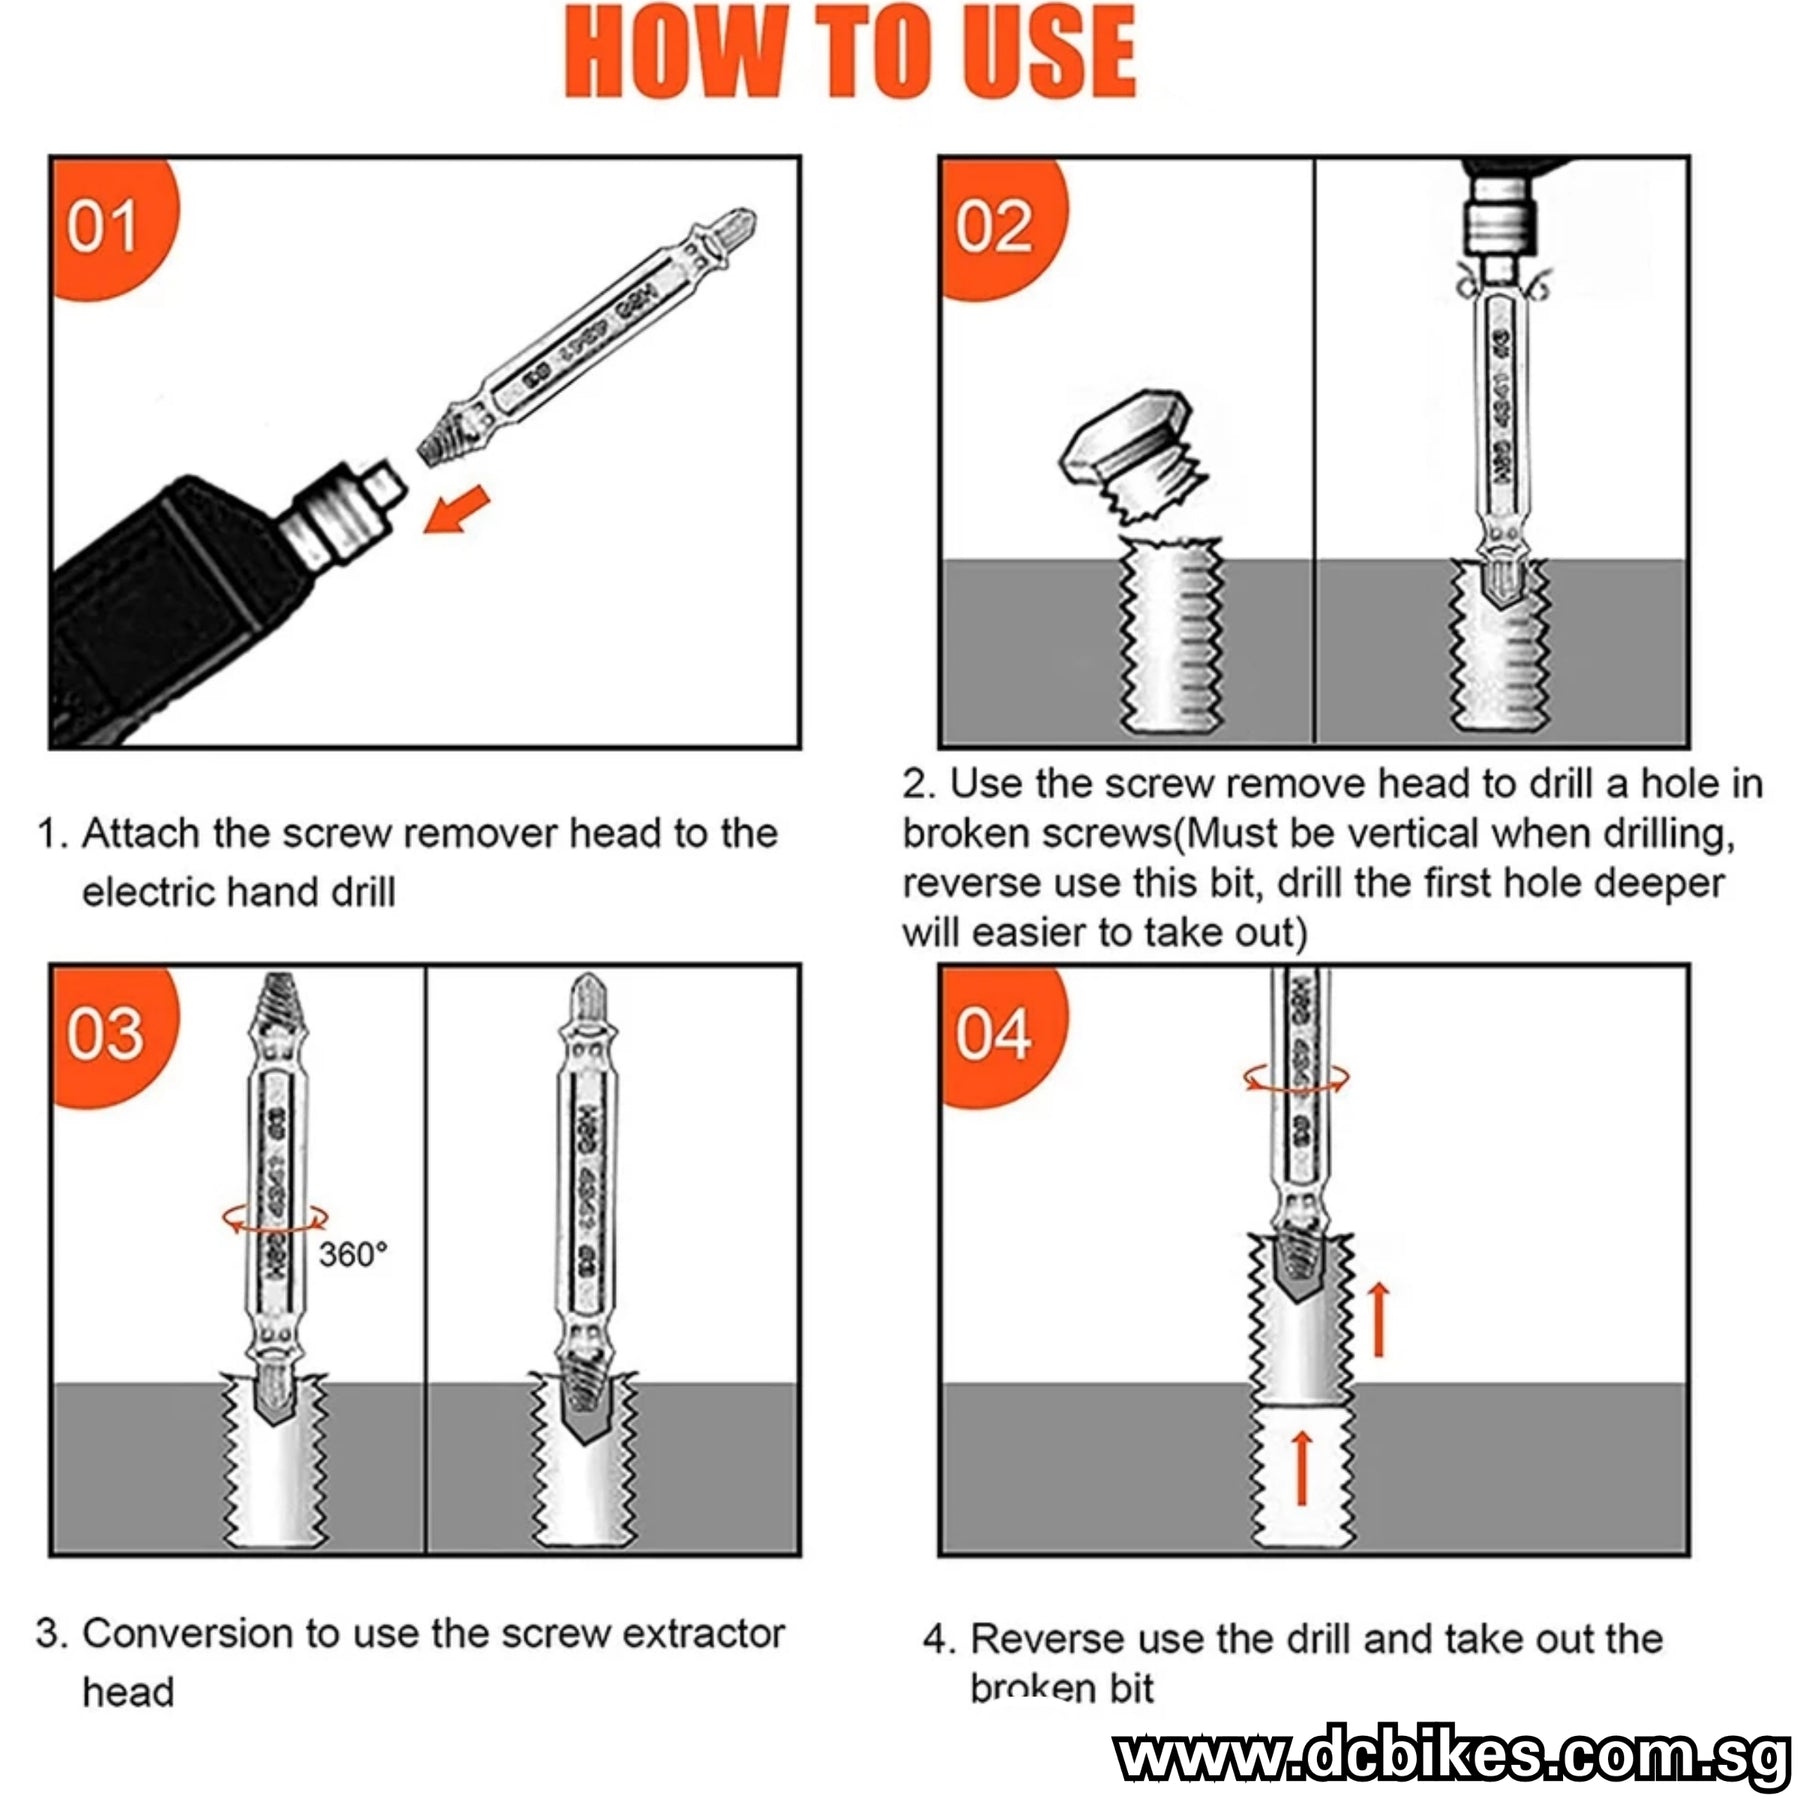 How to Use a Screw Extractor: Remove Damaged Screws!